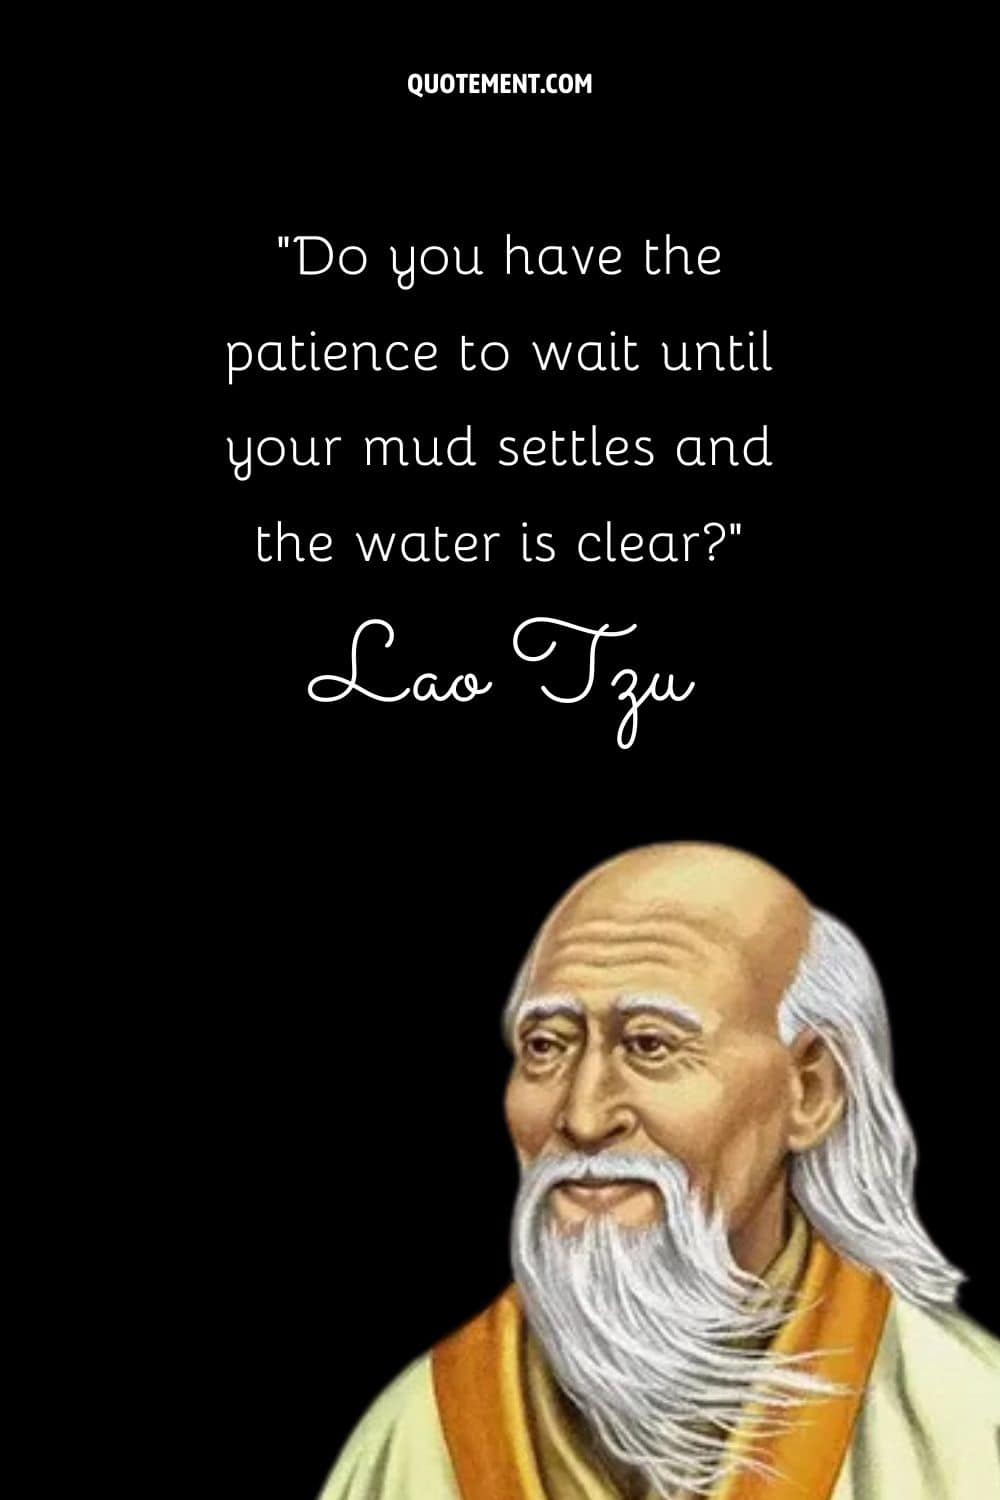 Do you have the patience to wait until your mud settles and the water is clear